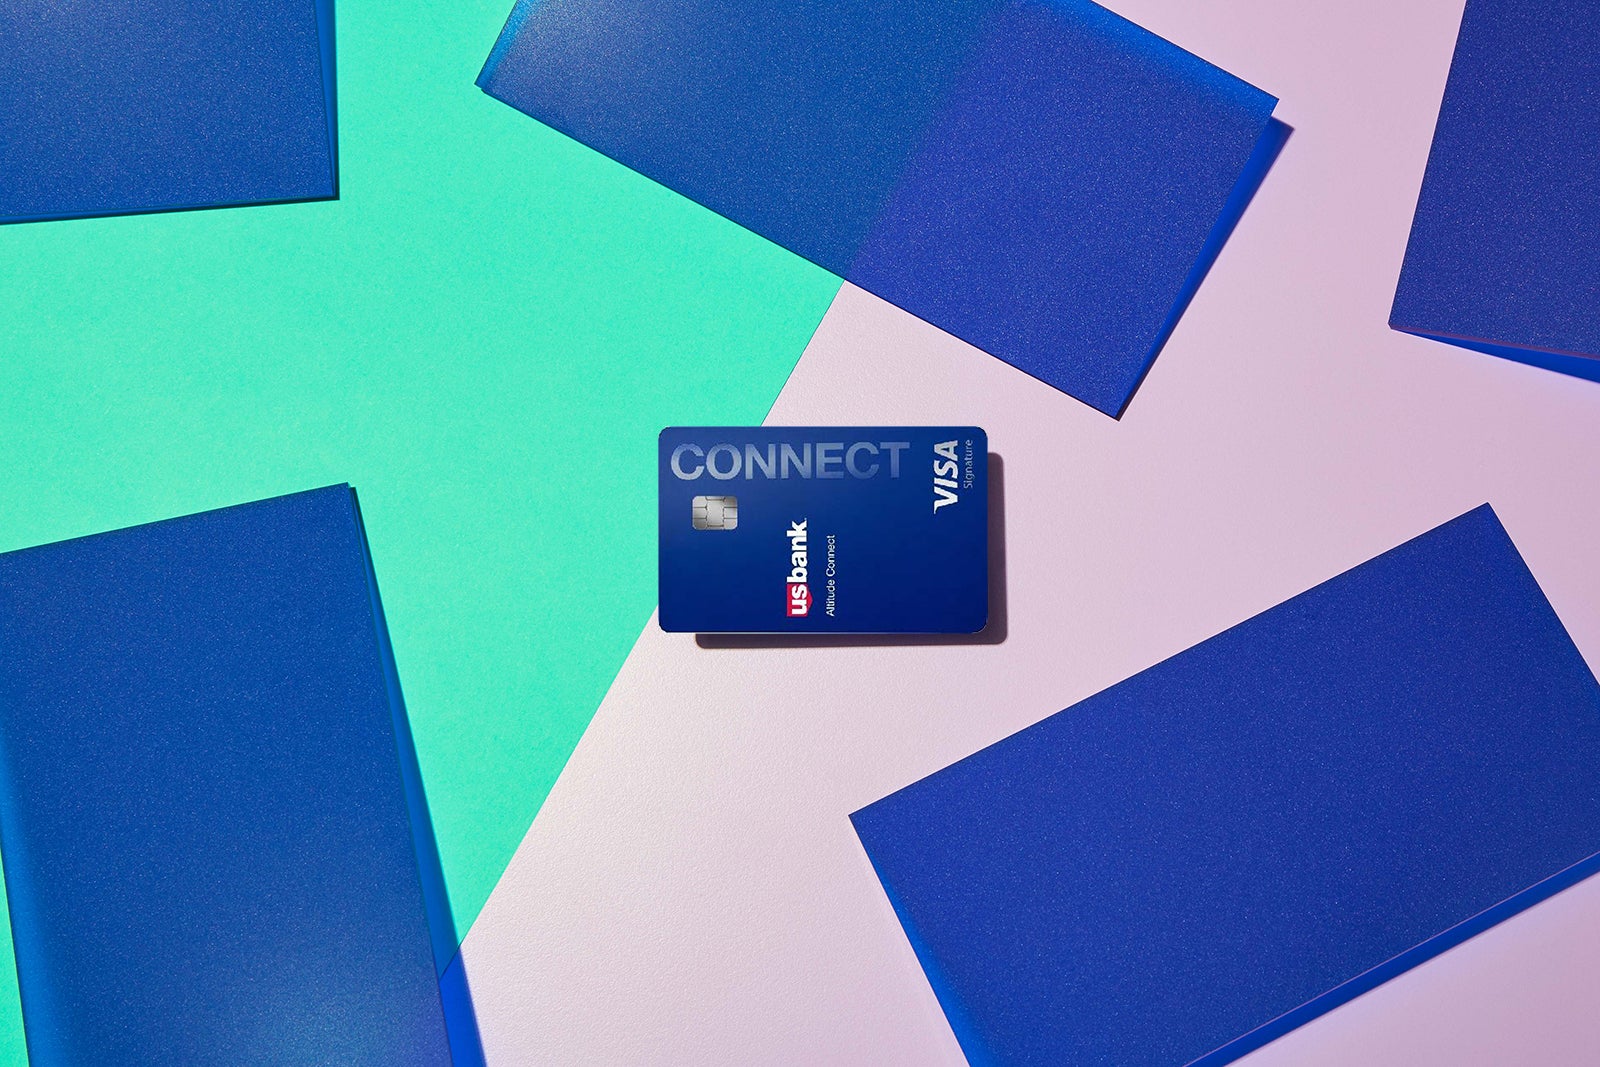 A credit card against a multi-colored background